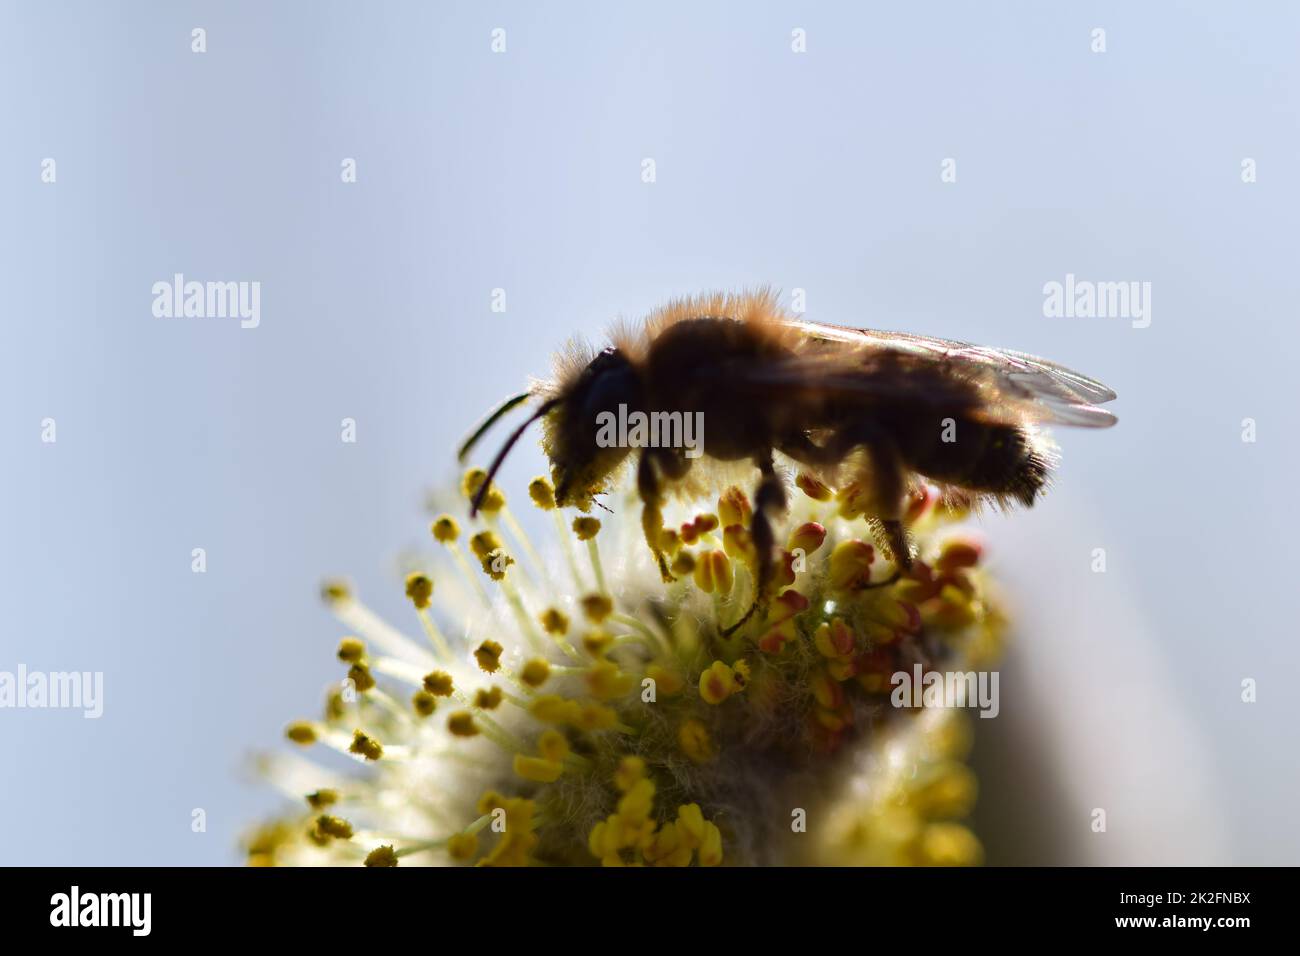 Bee on a flowering willow salicaceae against a blurred background Stock Photo